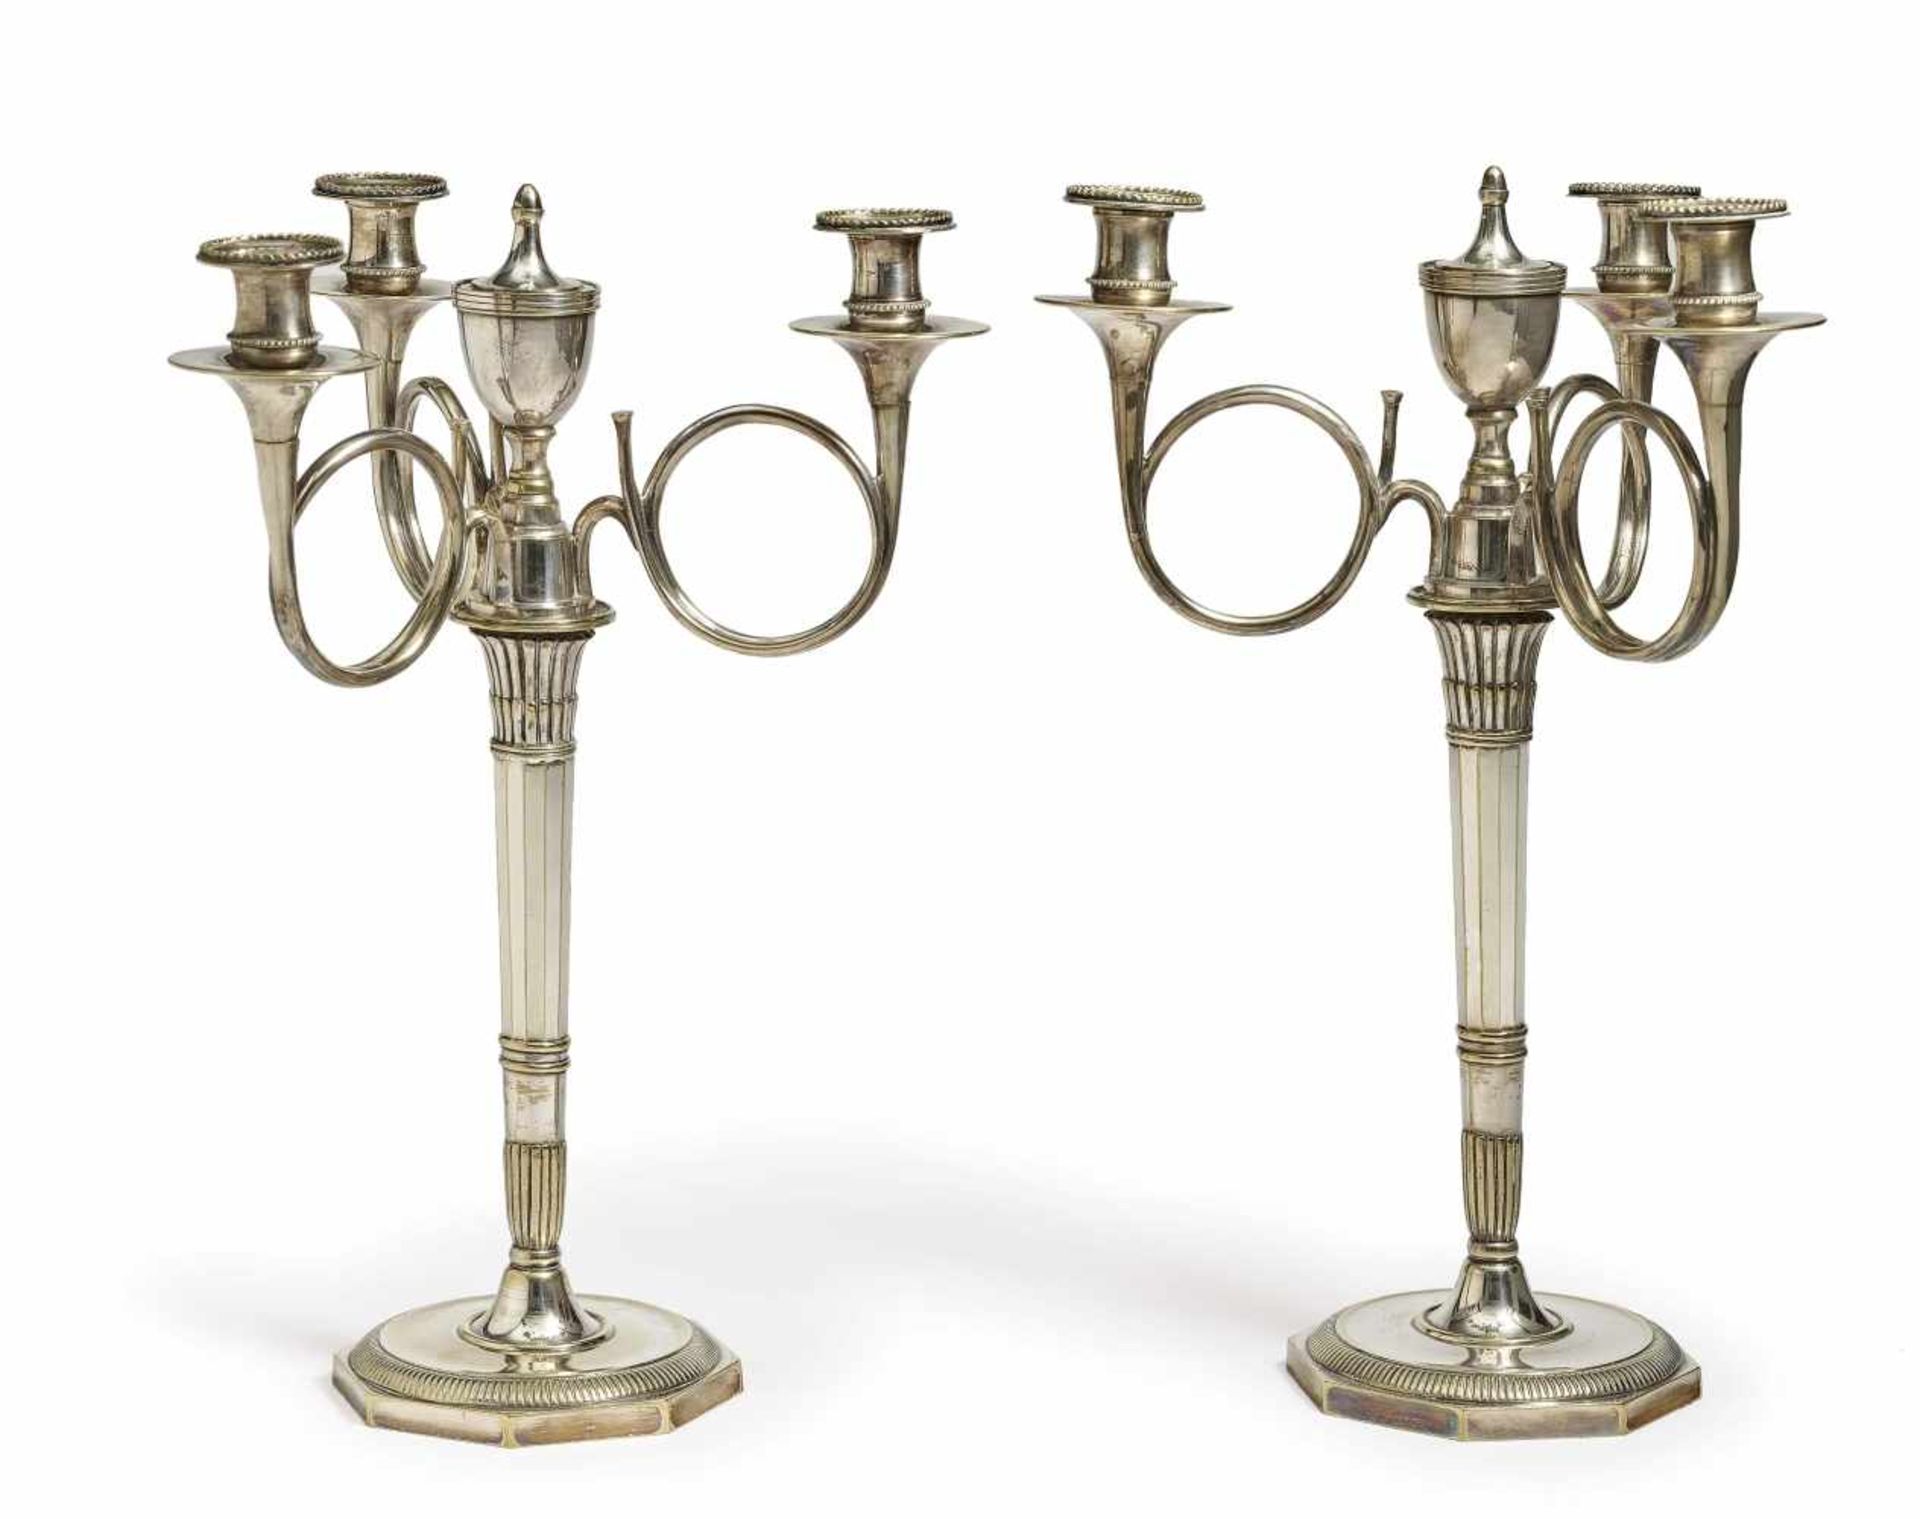 A pair of 4-light girandolesFrance, 19th century Bronze, silver-plated. Volute arms. Height 42 cm.